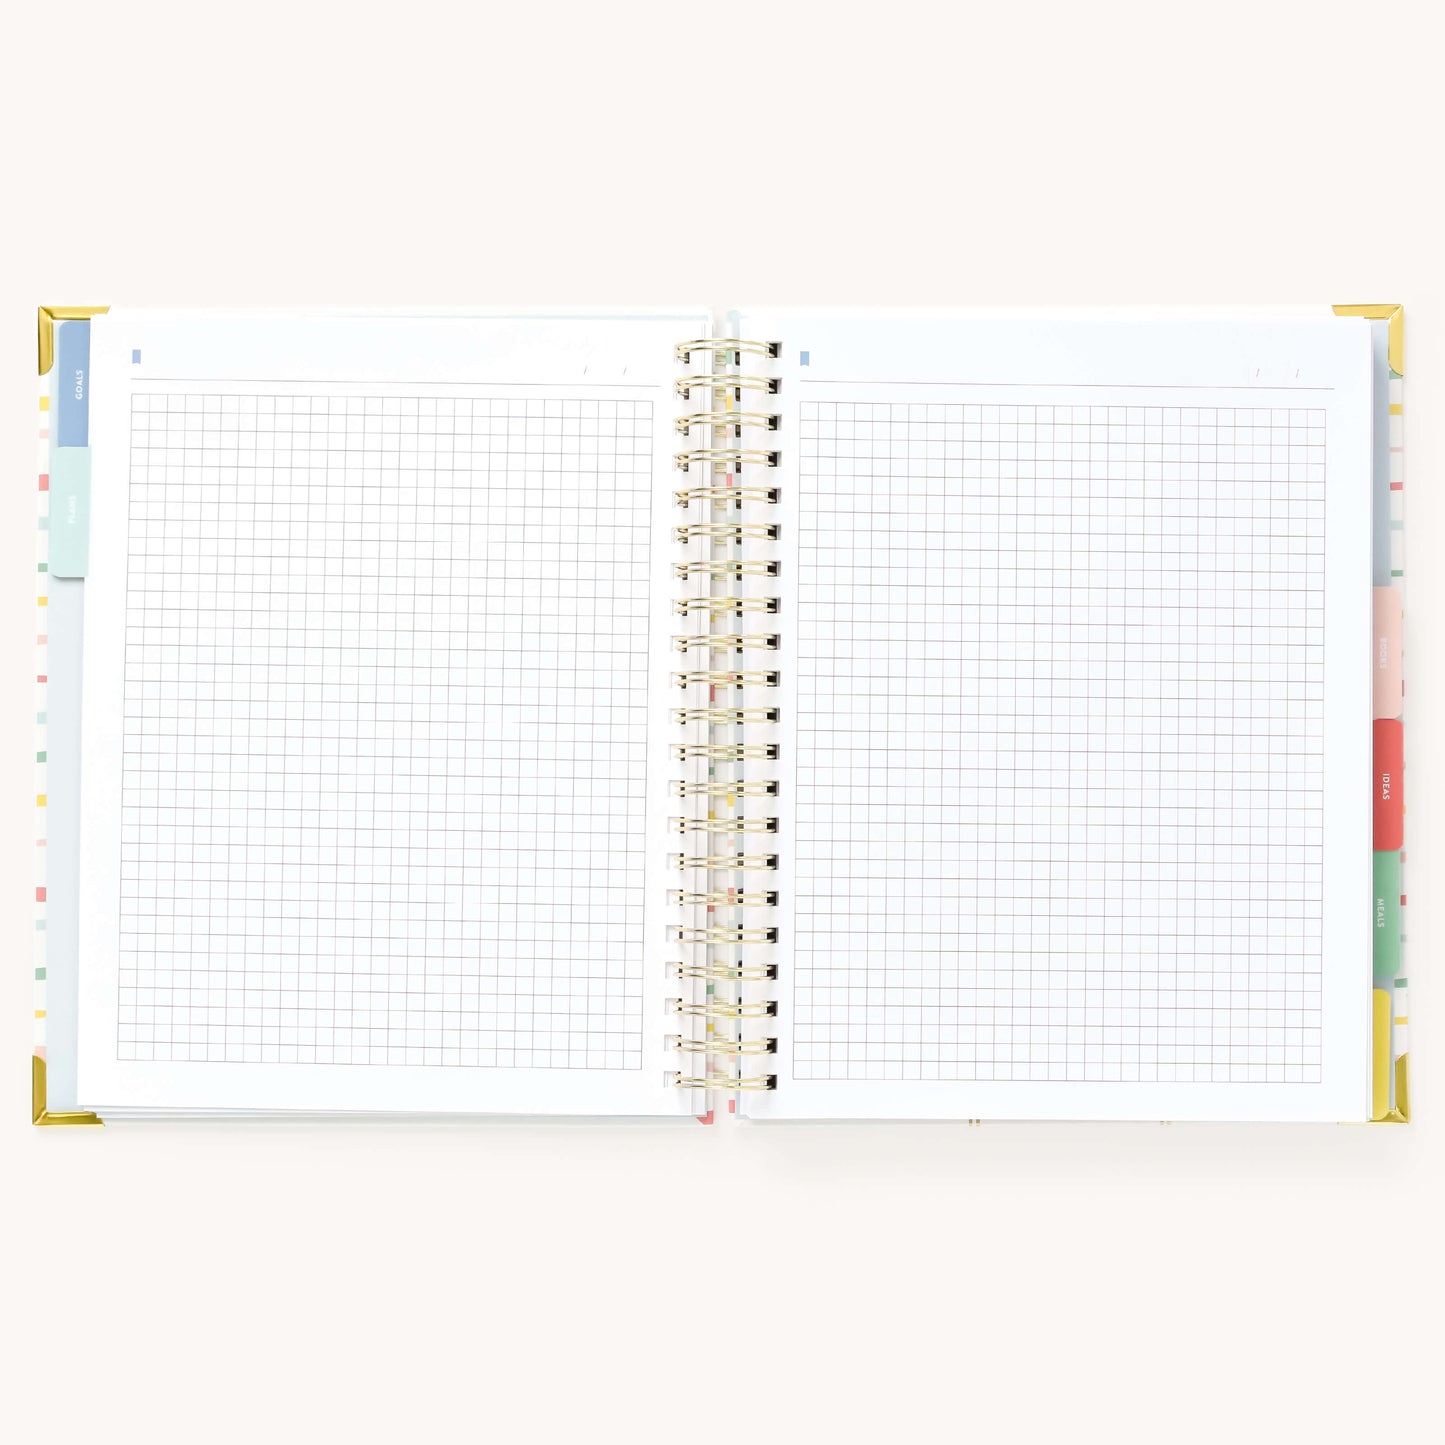 GRID PAGES